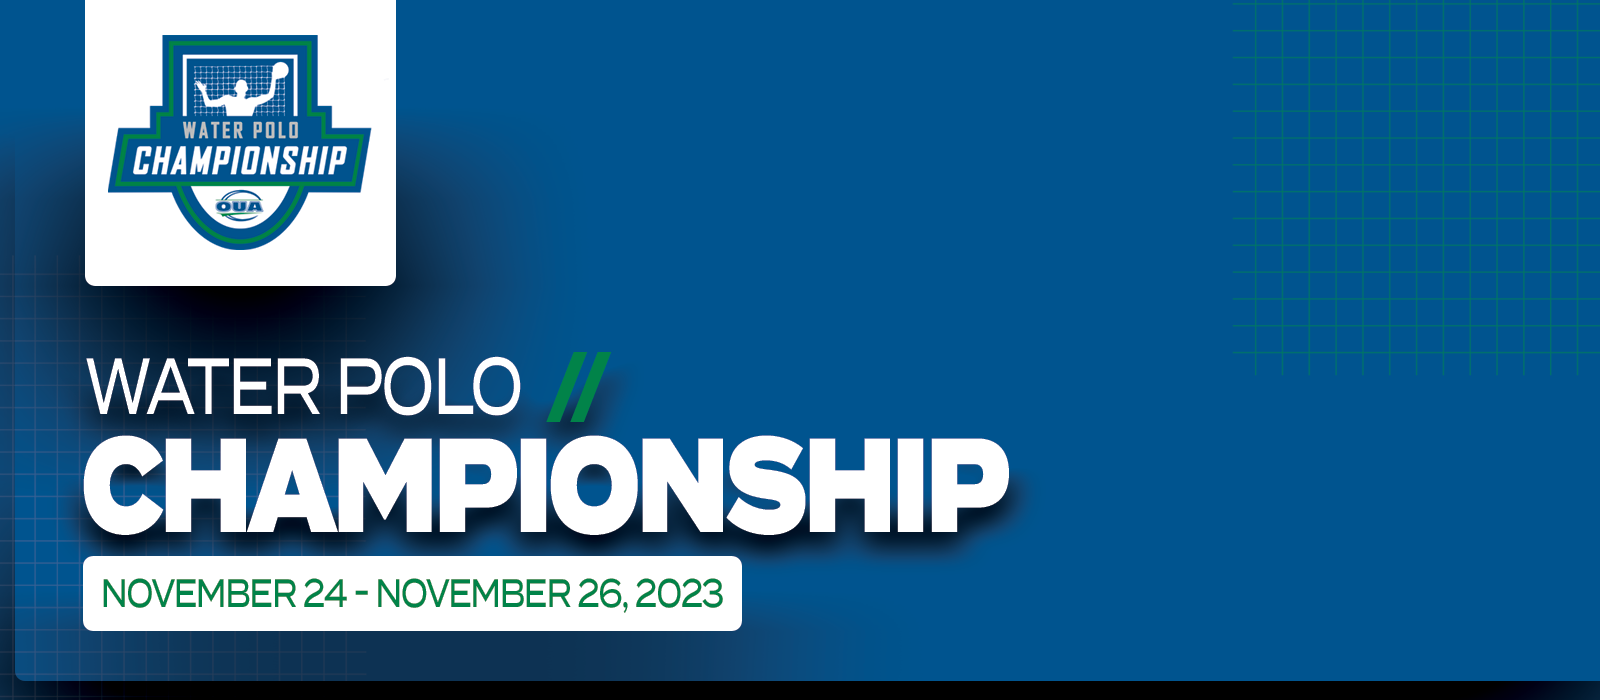 Predominantly blue graphic with large white text on the left side that reads Water Polo Championship, November 24 – November 26, 2023’ beneath the OUA Water Polo Championship logo